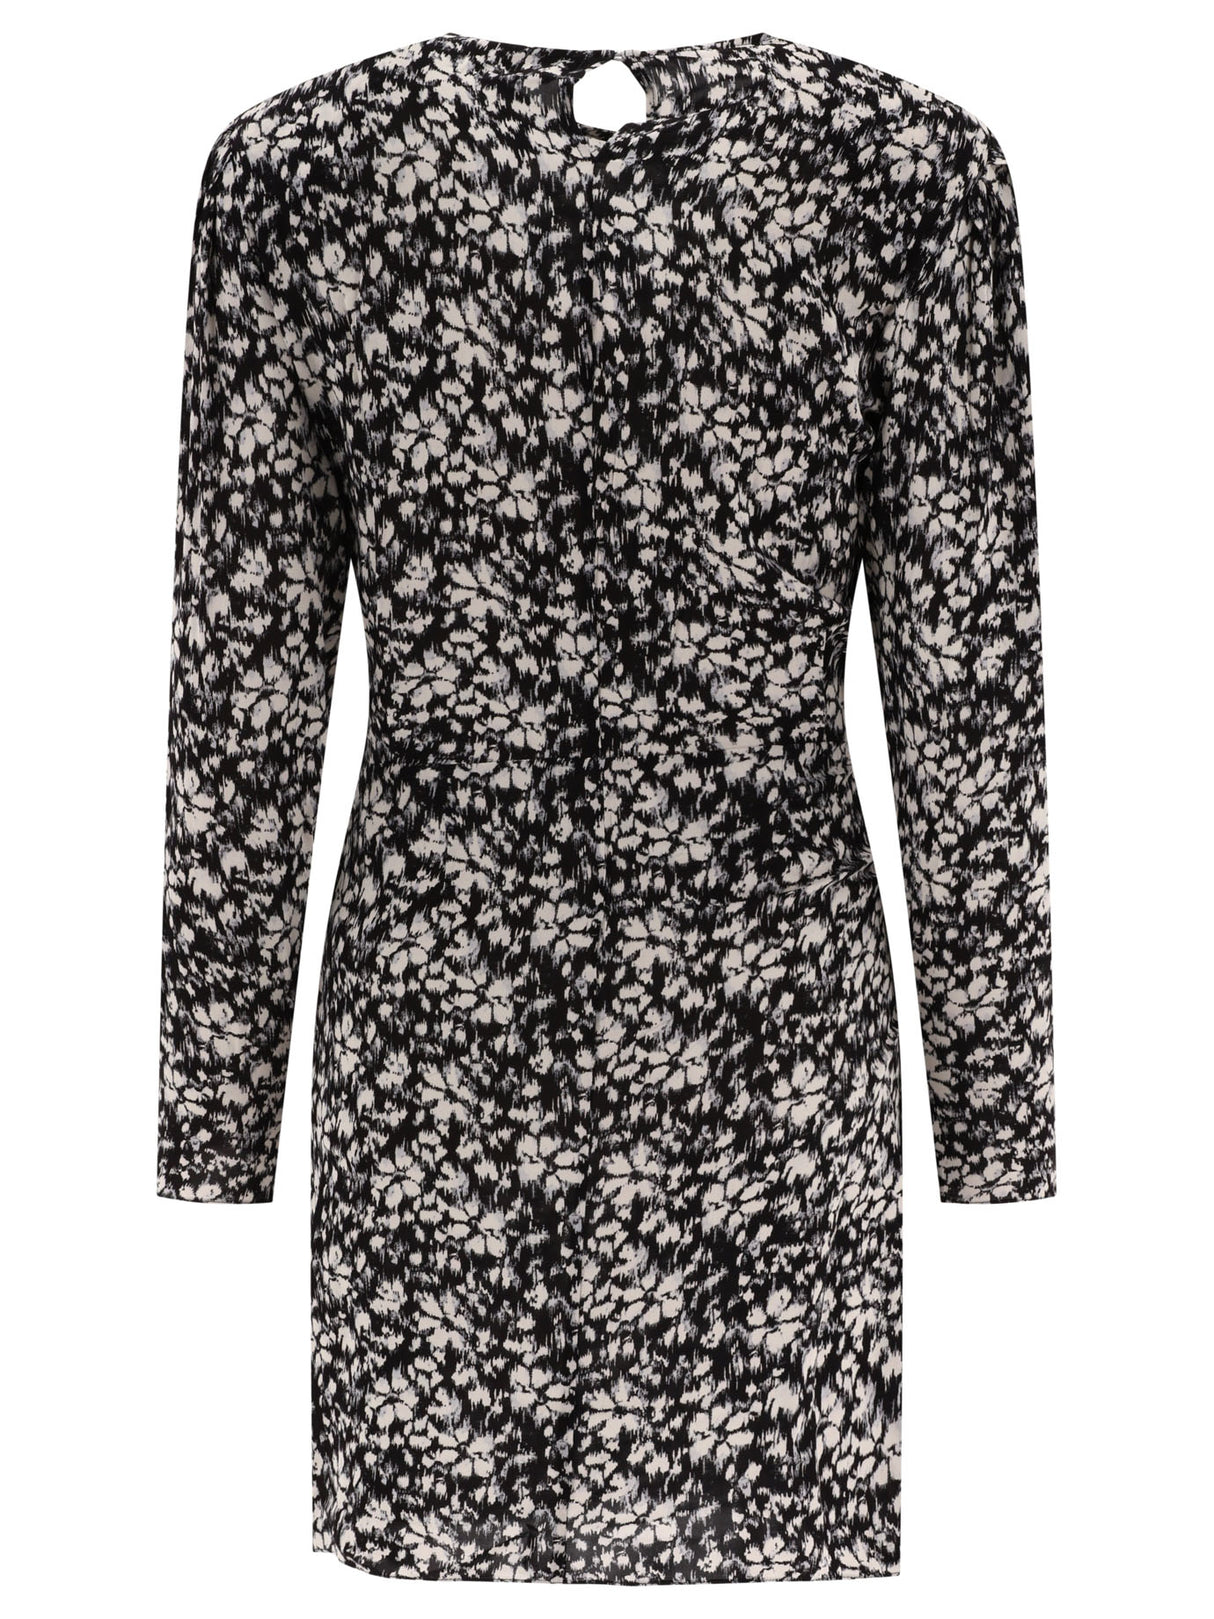 ISABEL MARANT ETOILE Black Ruffle Dress for Women - Long Sleeves, Bow at Waist - FW23 Collection